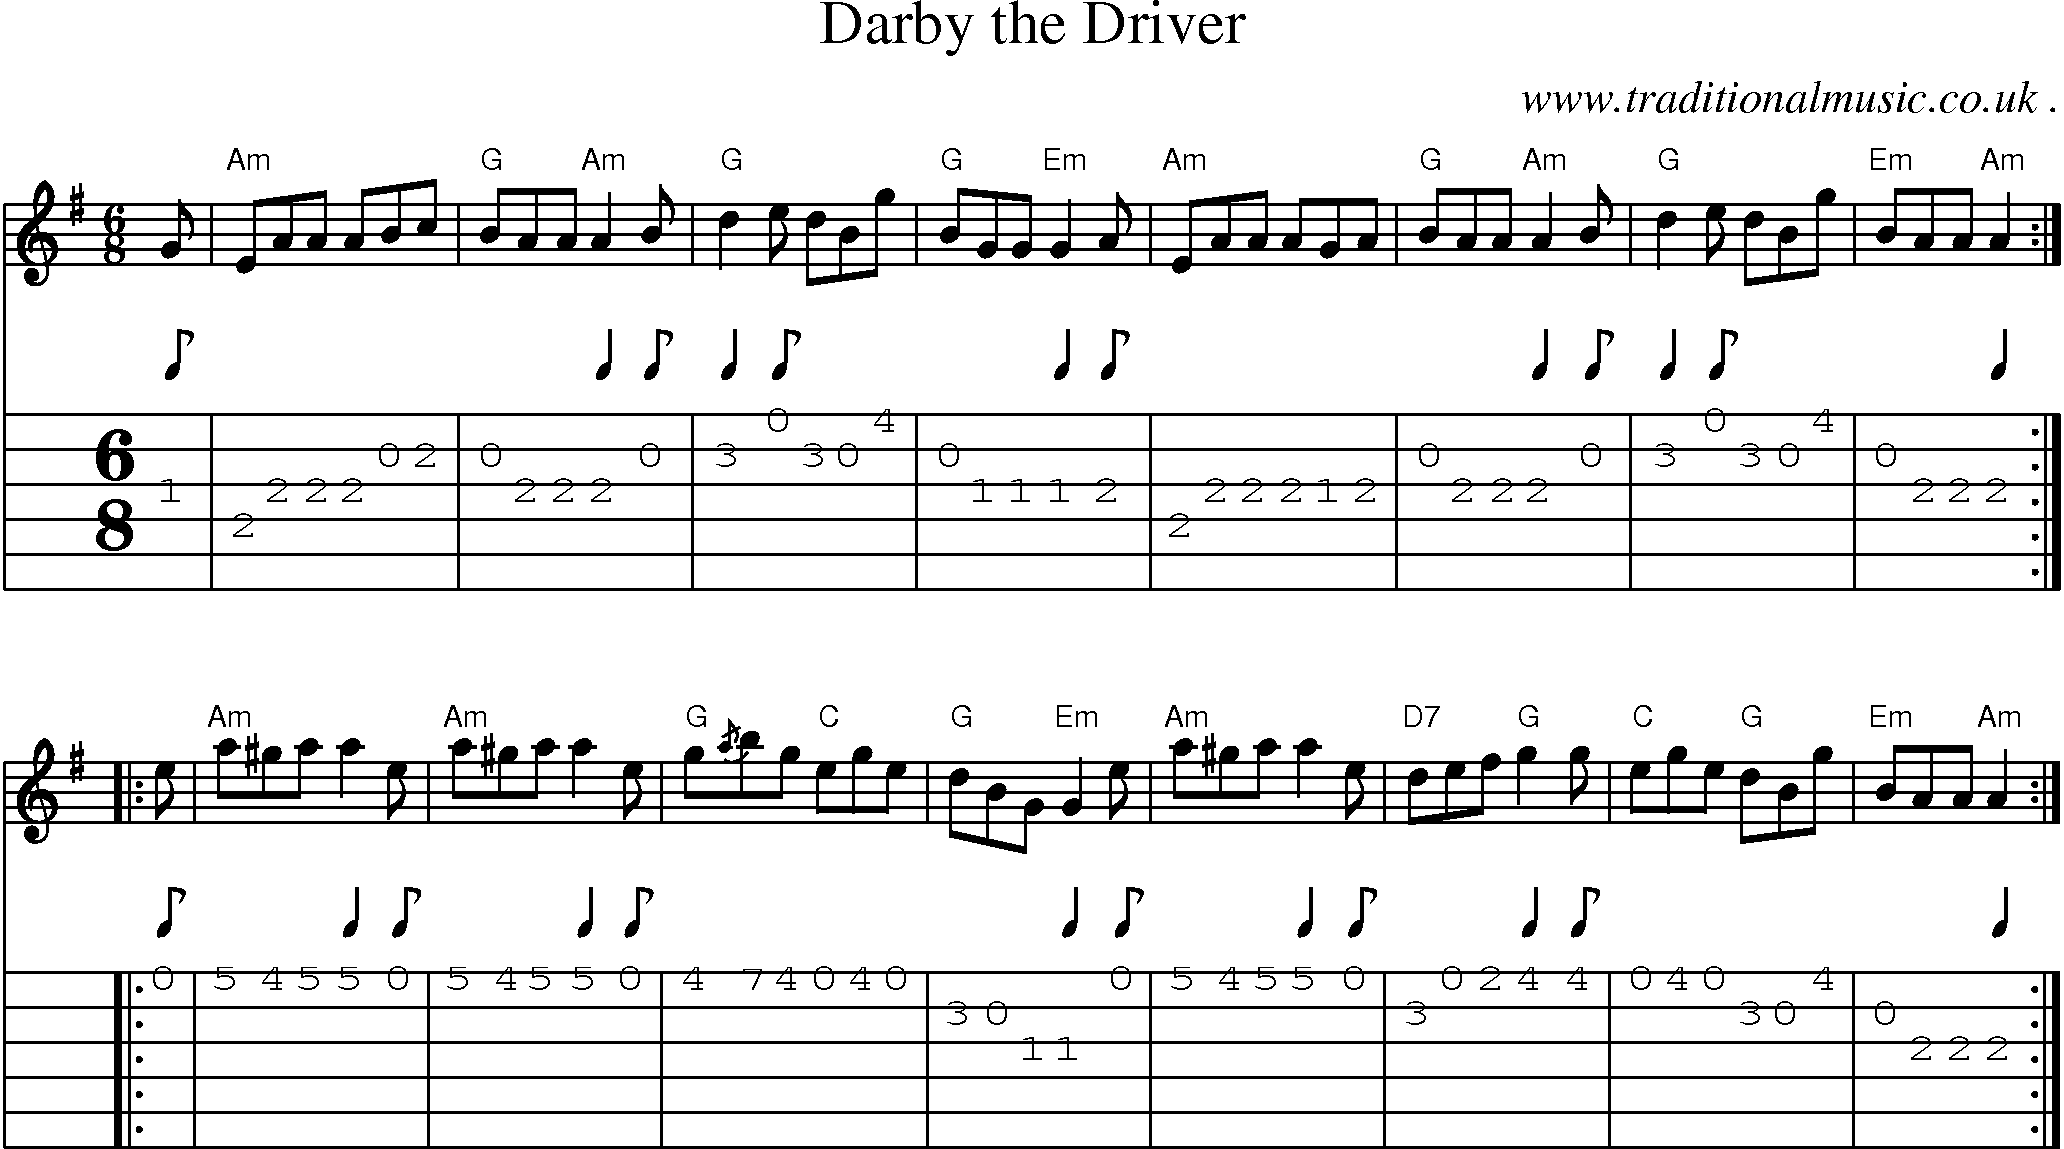 Sheet-music  score, Chords and Guitar Tabs for Darby The Driver